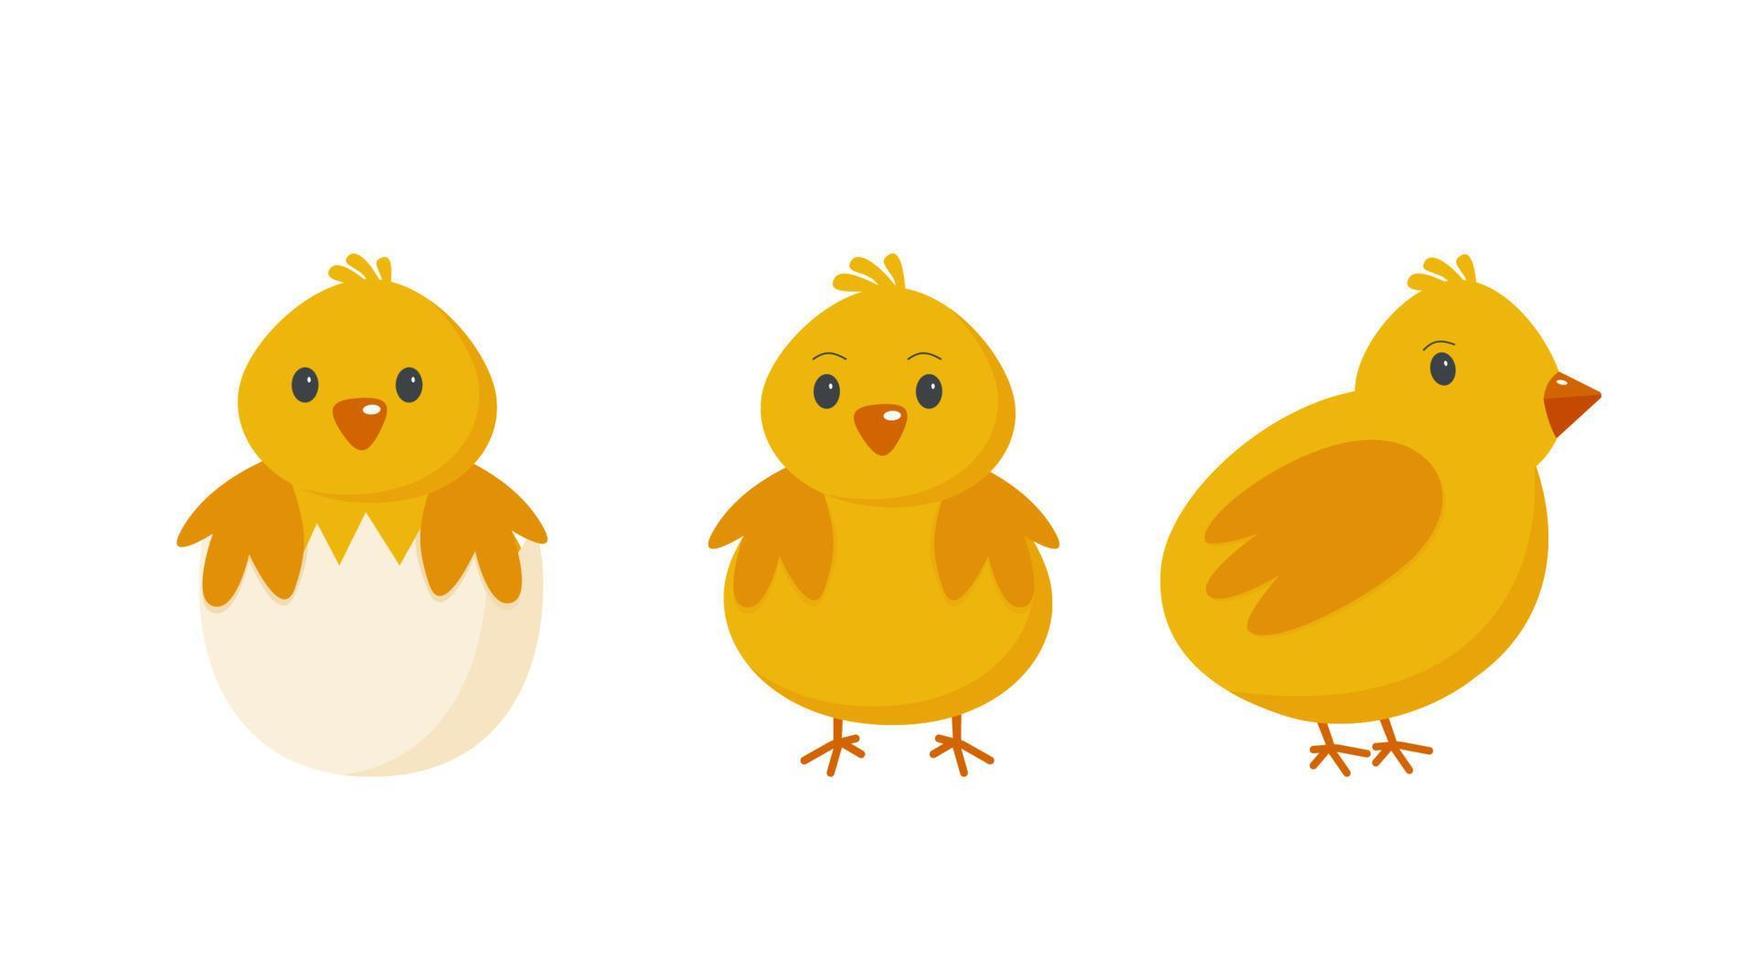 Easter chickens cartoon style on a white background vector